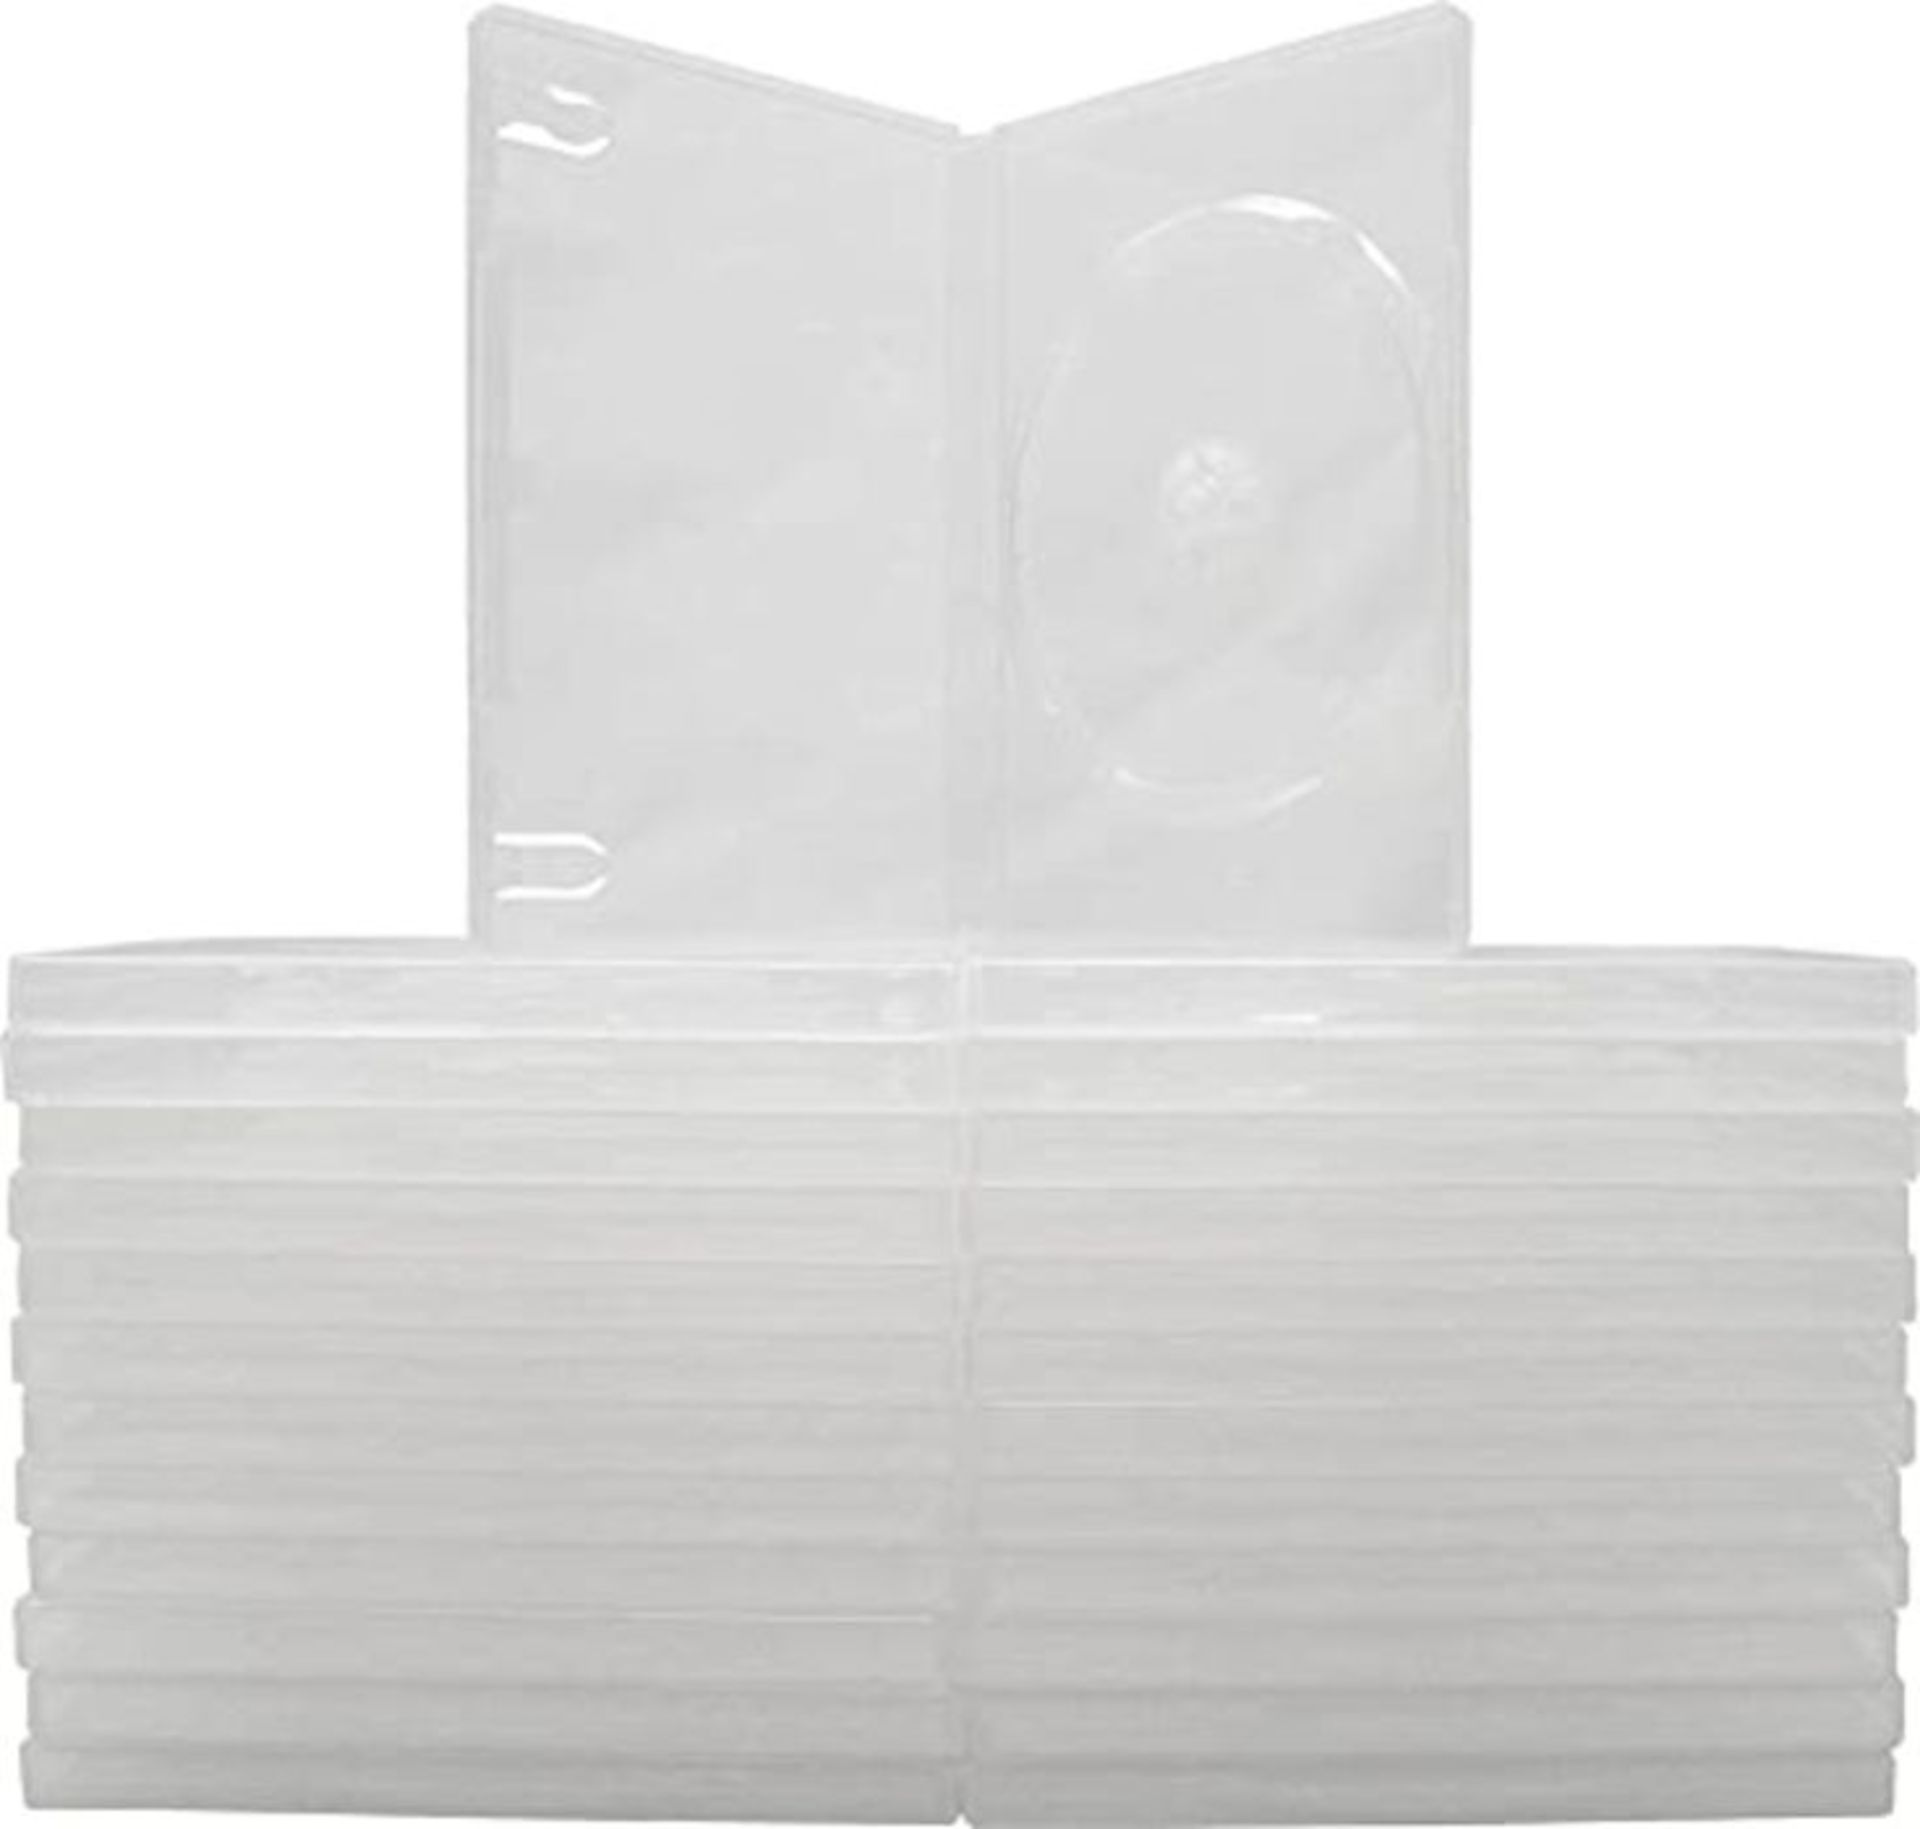 25 Empty Standard Clear Replacement Boxes / Cases for Single DVD Movies #DVBR14CL